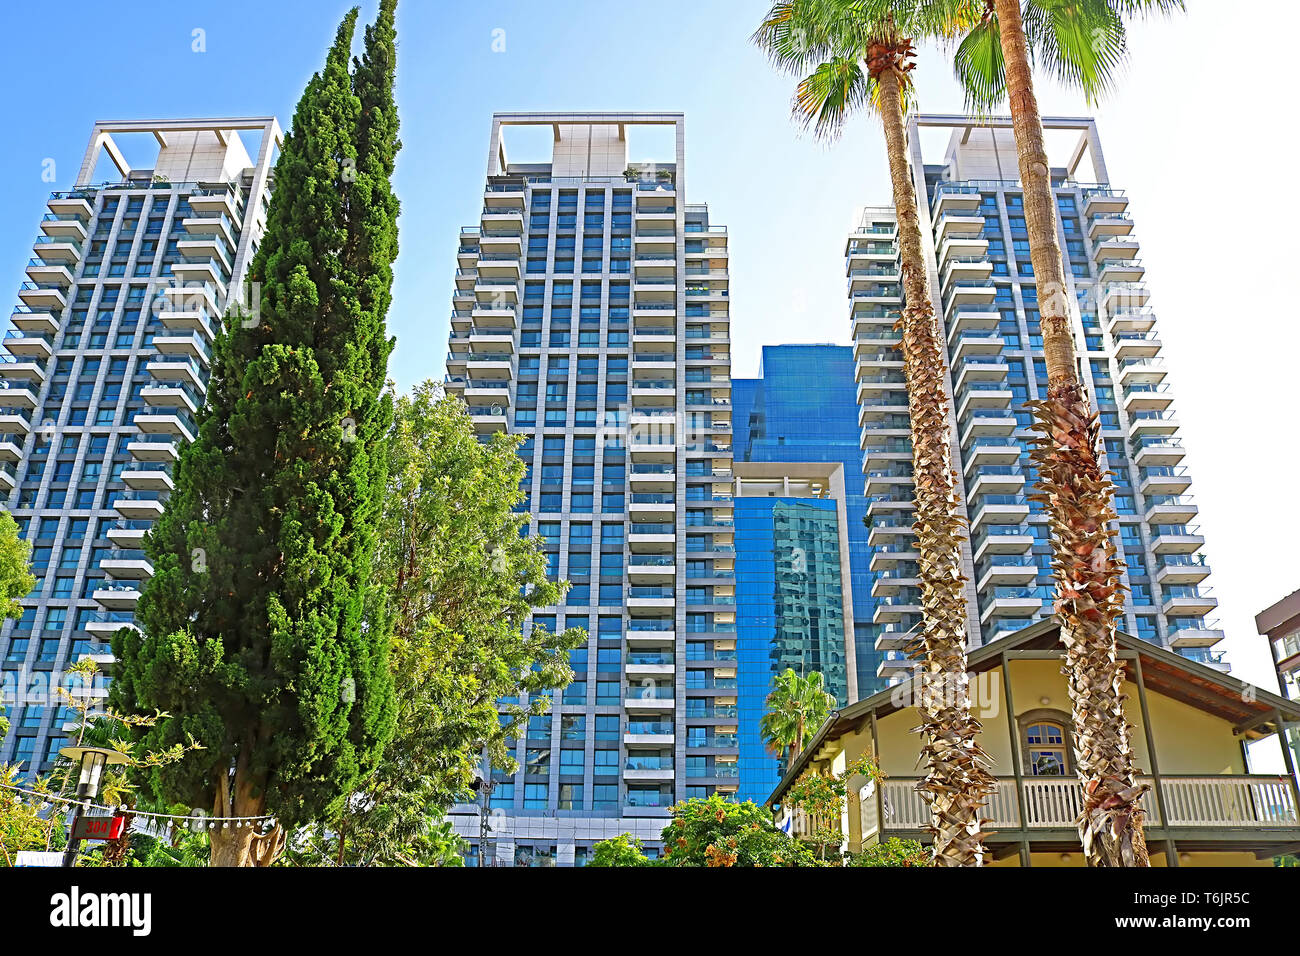 Tlv Tel Aviv High Resolution Stock Photography and Images - Alamy